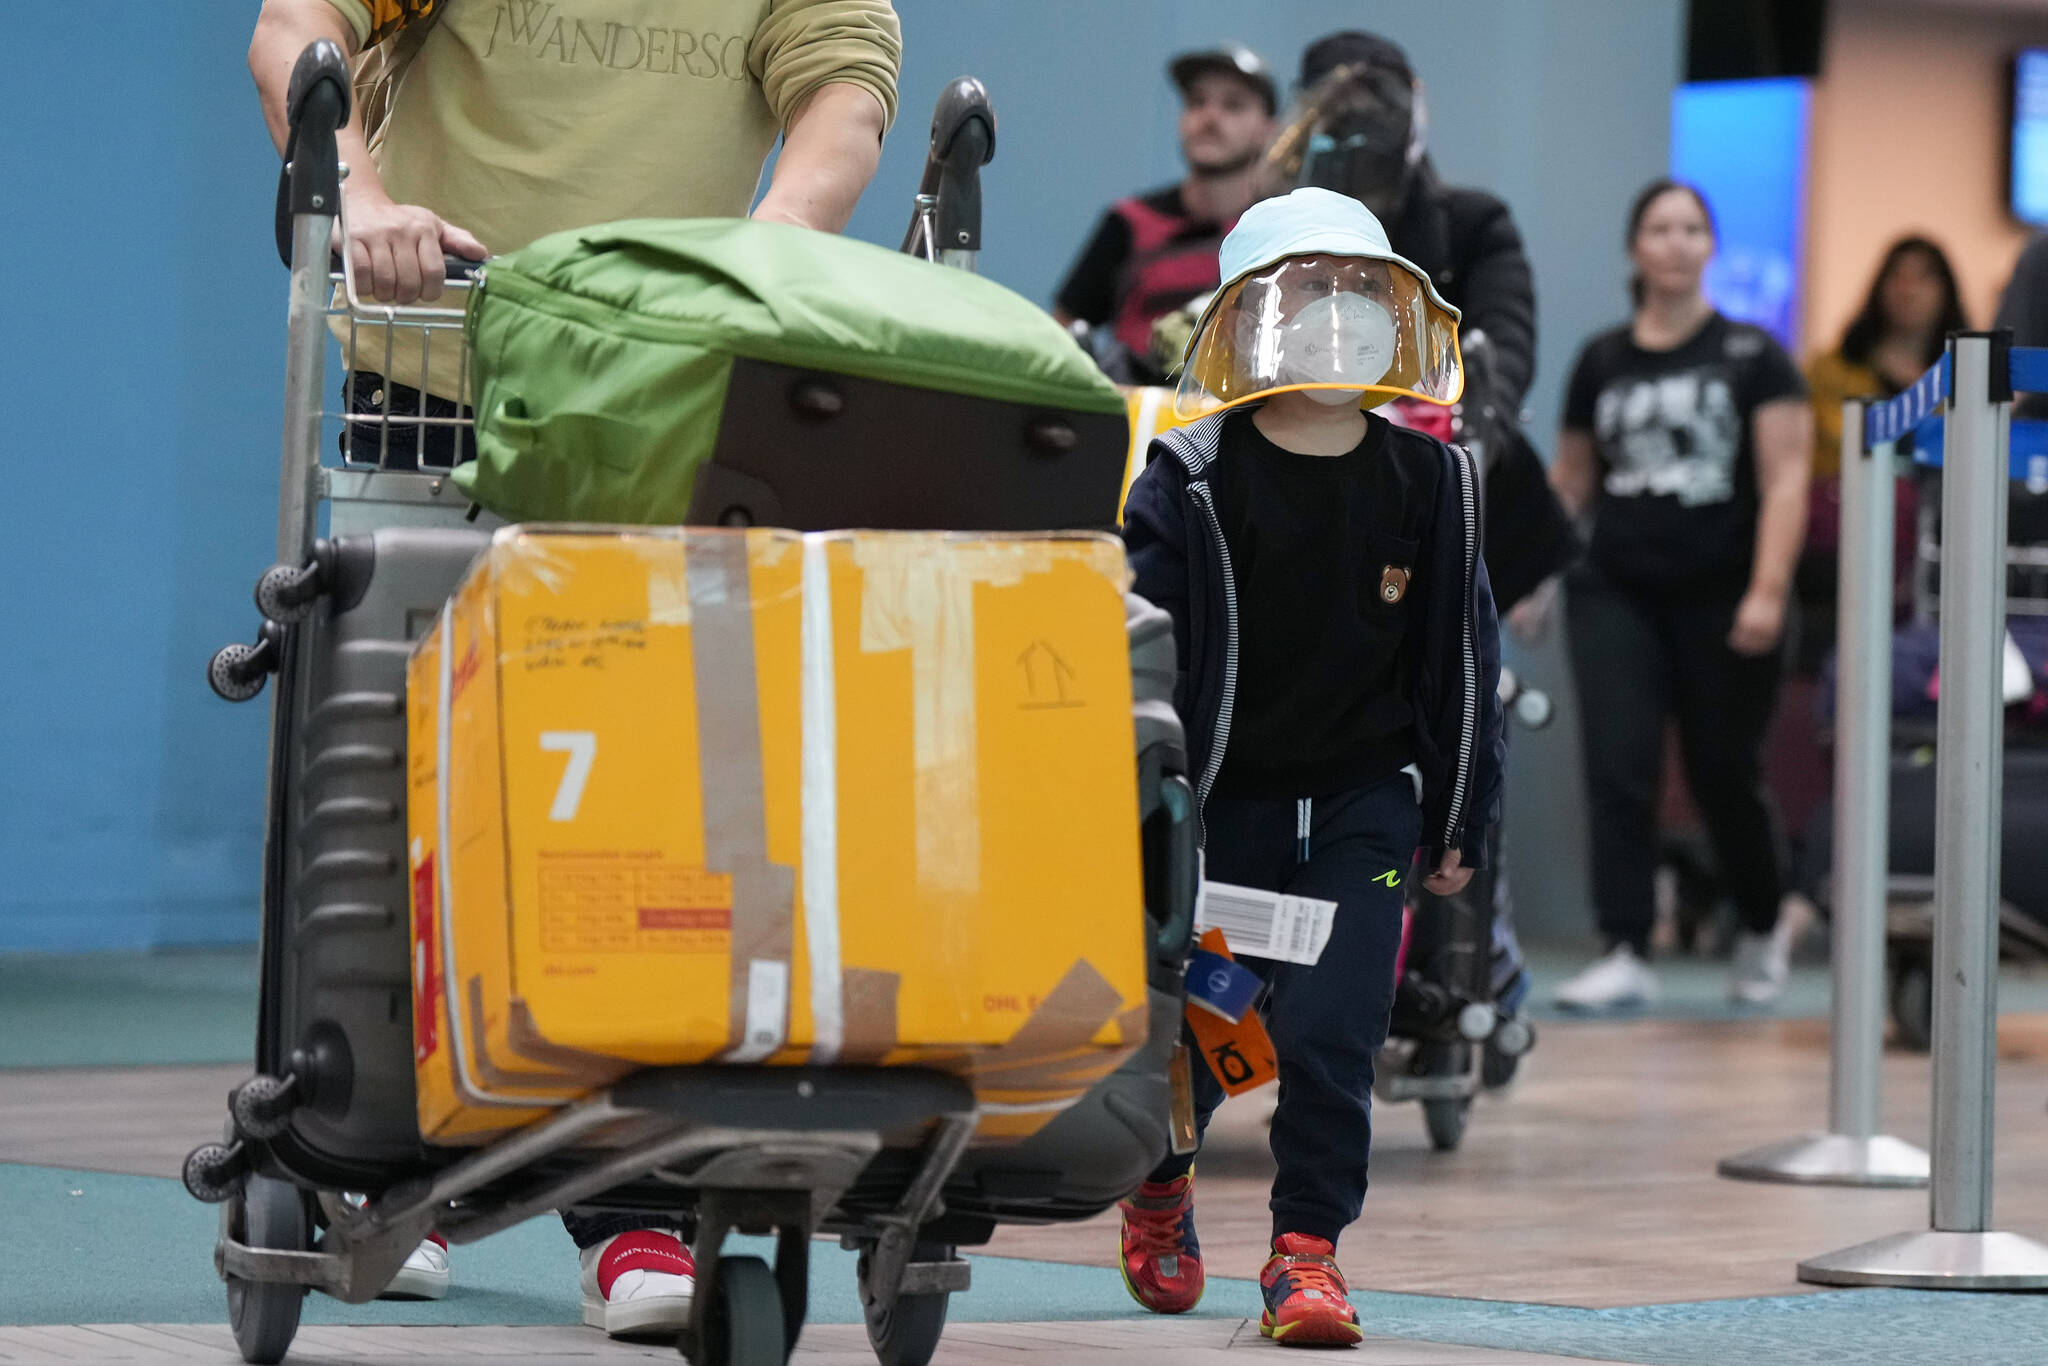 A young boy who arrived on a Cathay Pacific flight from Hong Kong wears a face mask and face shield at Vancouver International Airport, in Richmond, B.C., on Wednesday, January 4, 2023. Starting Thursday, Canada will require air travellers from China, Hong Kong and Macau to have a recent negative COVID-19 test result. THE CANADIAN PRESS/Darryl Dyck